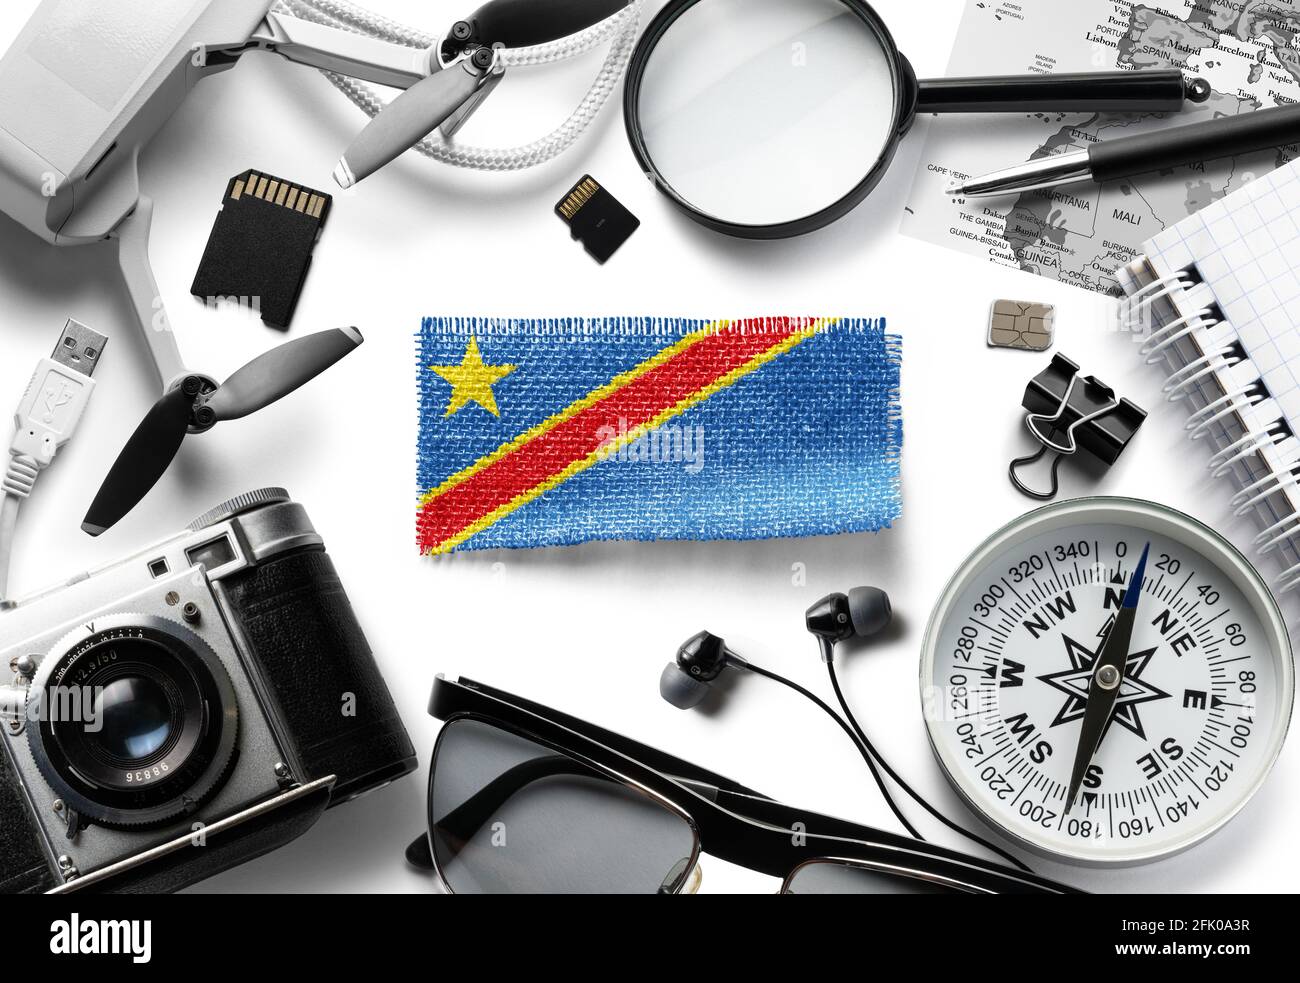 Flag of Democratic Republic of the Congo and travel accessories on a white background. Stock Photo